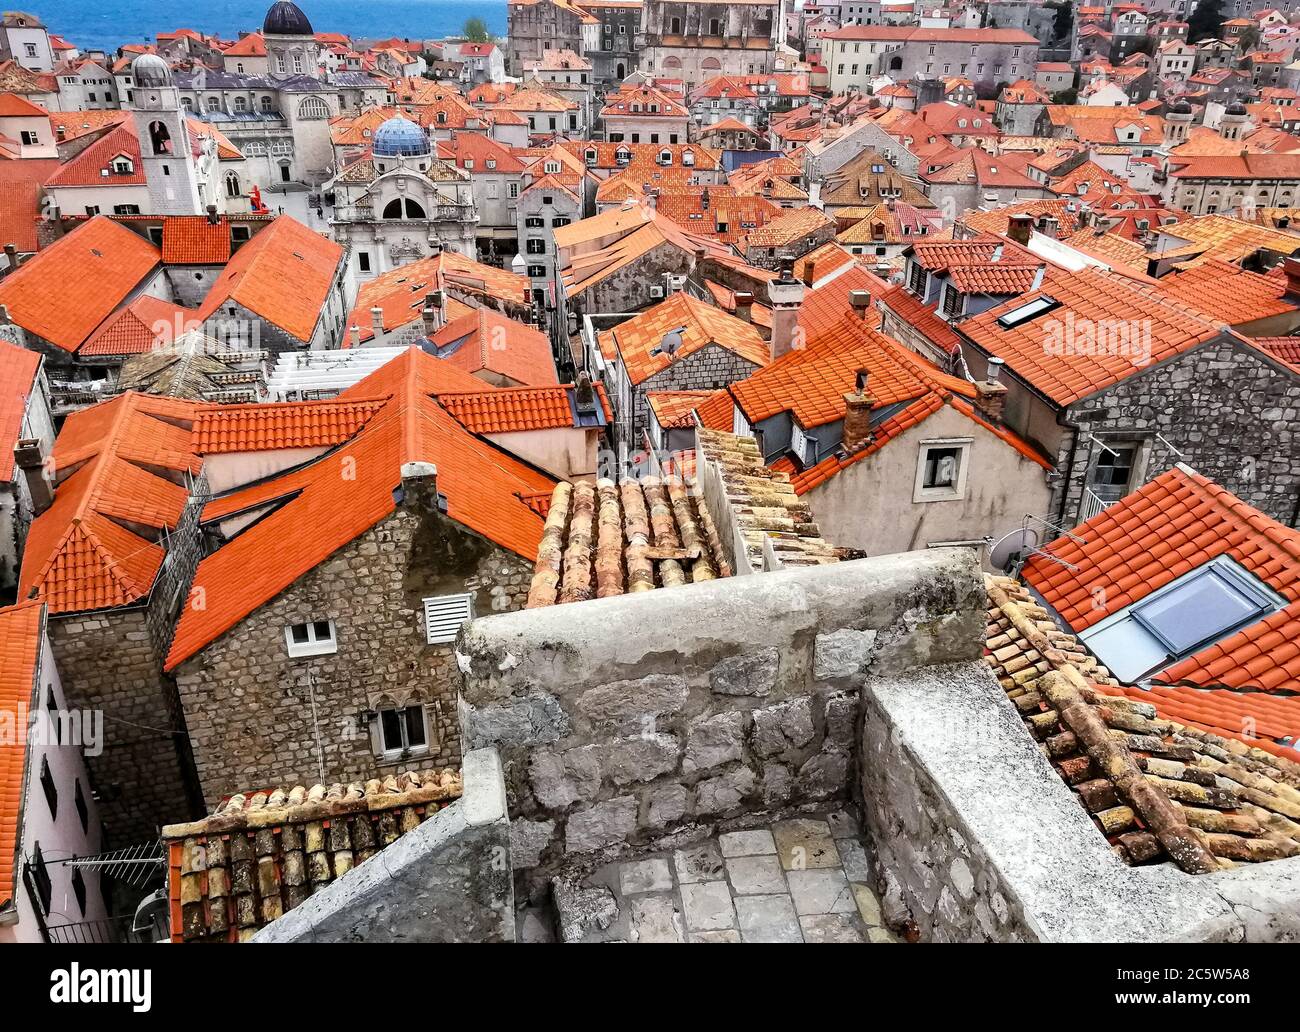 Dubrovnik cityscape with picturesque orange rooftops as seen from the Walls of Dubrovnik, Dalmatia, Croatia. Stock Photo